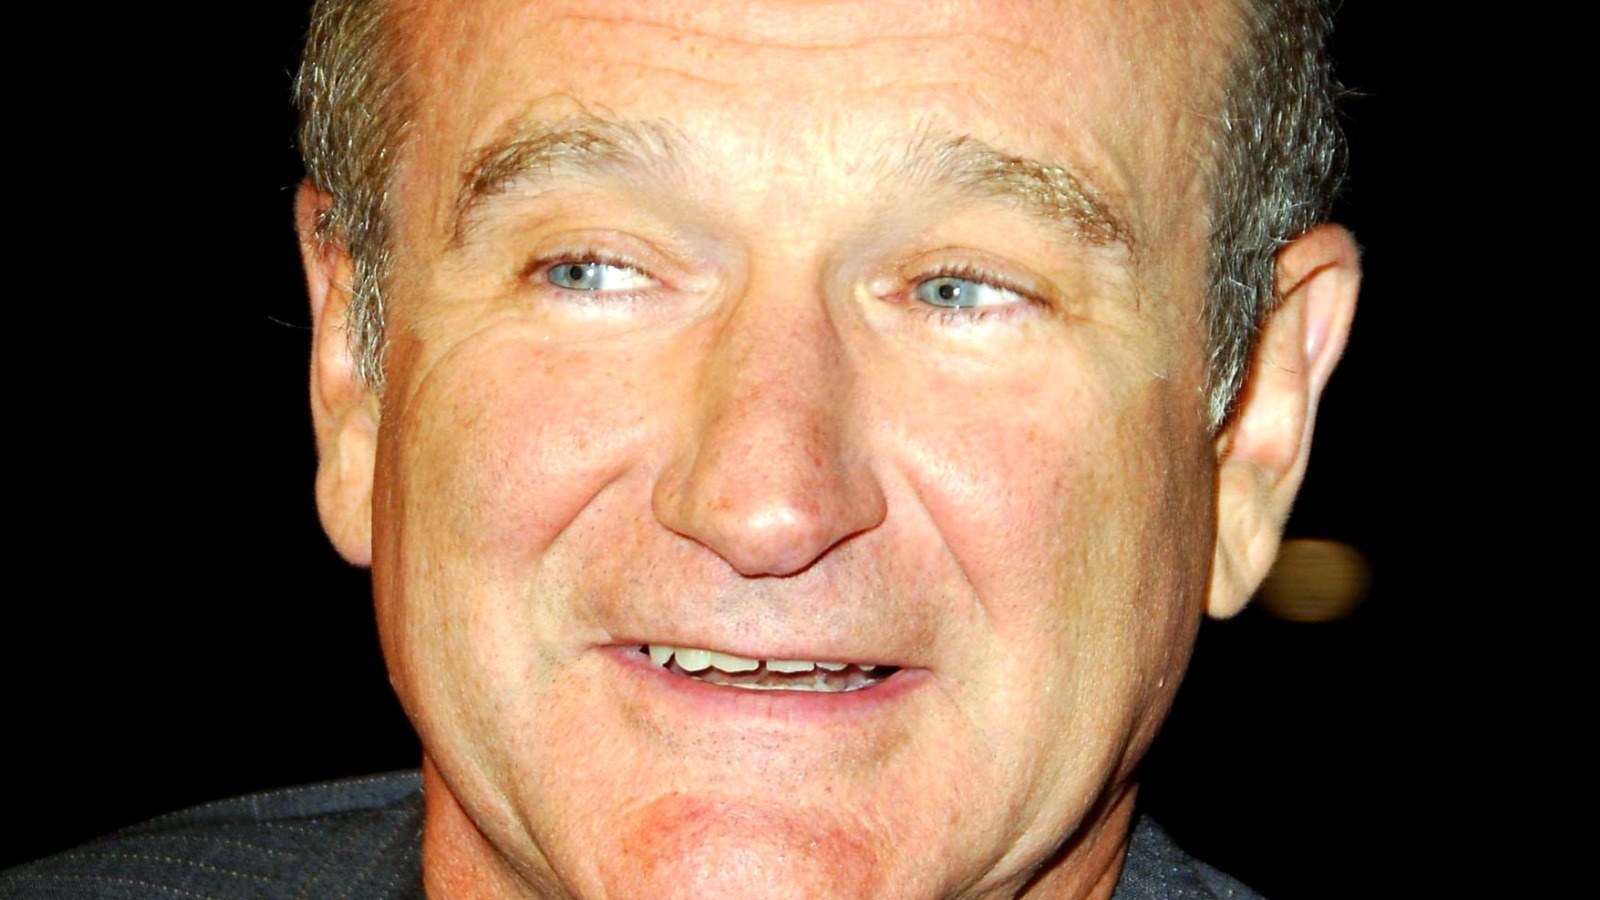 Robin Williams plays 40K. Sorry if this is already known. : r/Warhammer40k